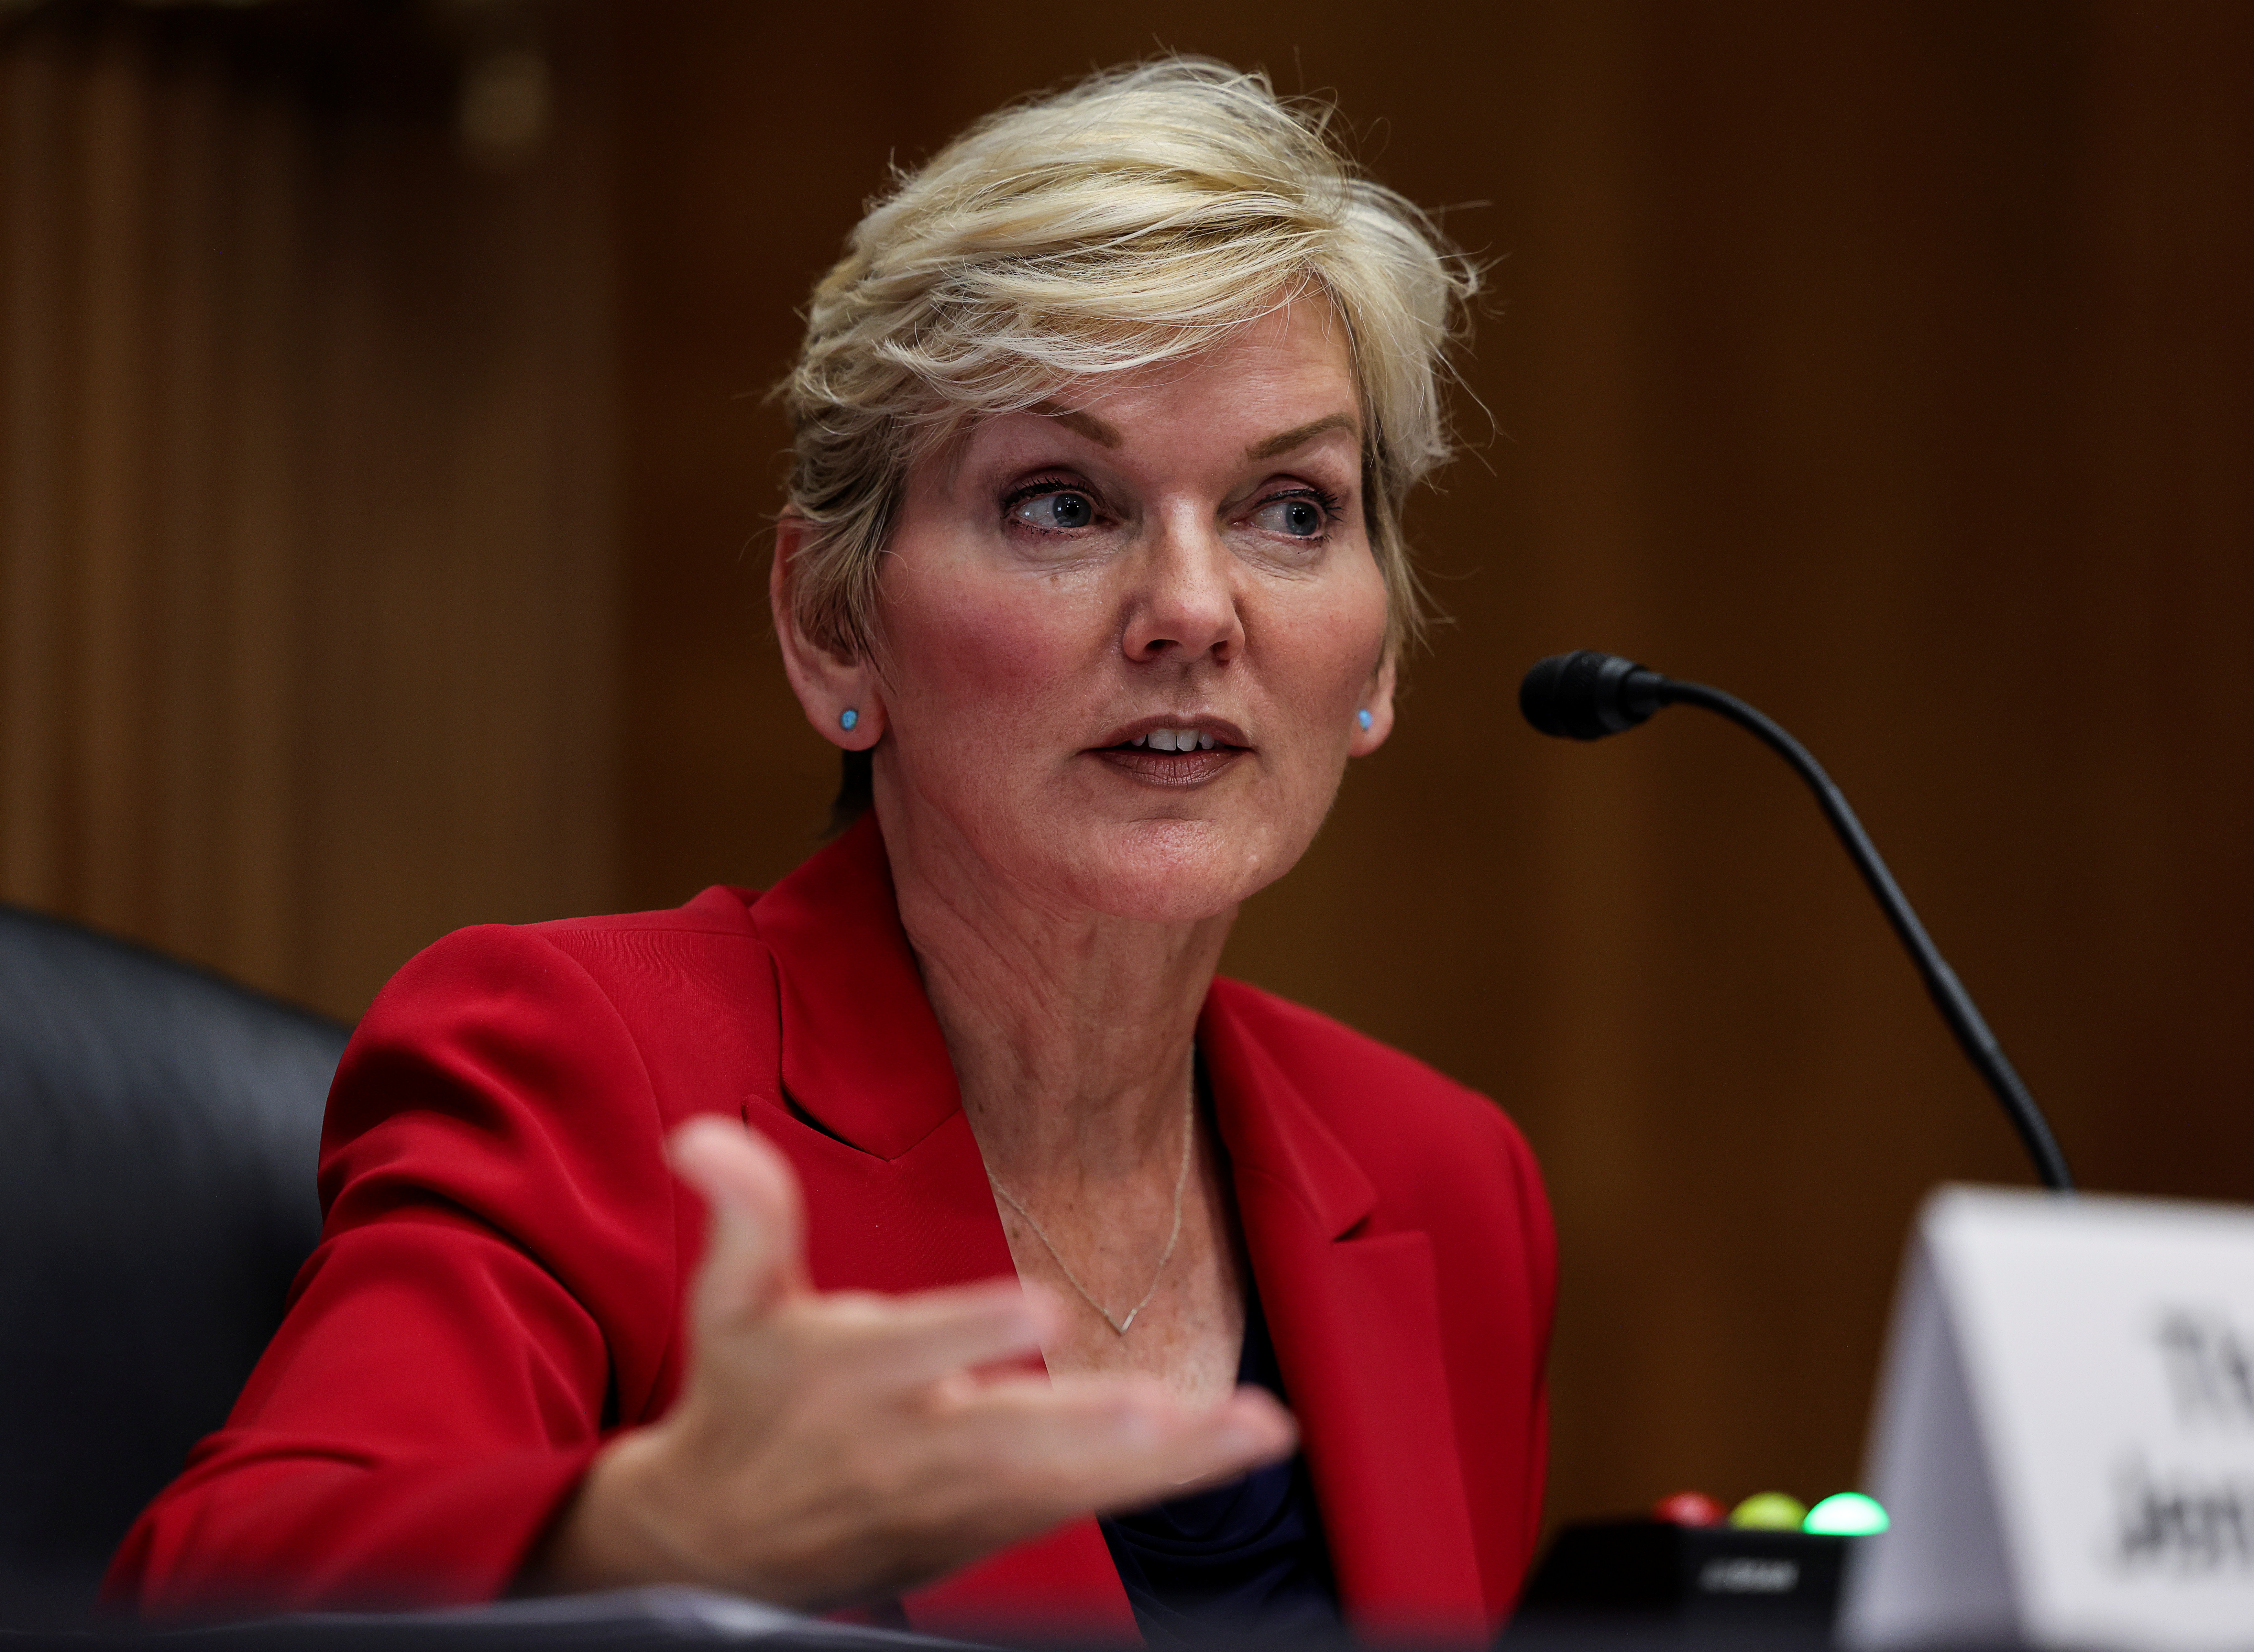 U.S. Energy Secretary Jennifer Granholm testifies at a Senate Energy & Natural Resources Committee hearing on the Energy Department's budget request on Capitol Hill in Washington, U.S., June 15, 2021. REUTERS/Evelyn Hockstein/Files